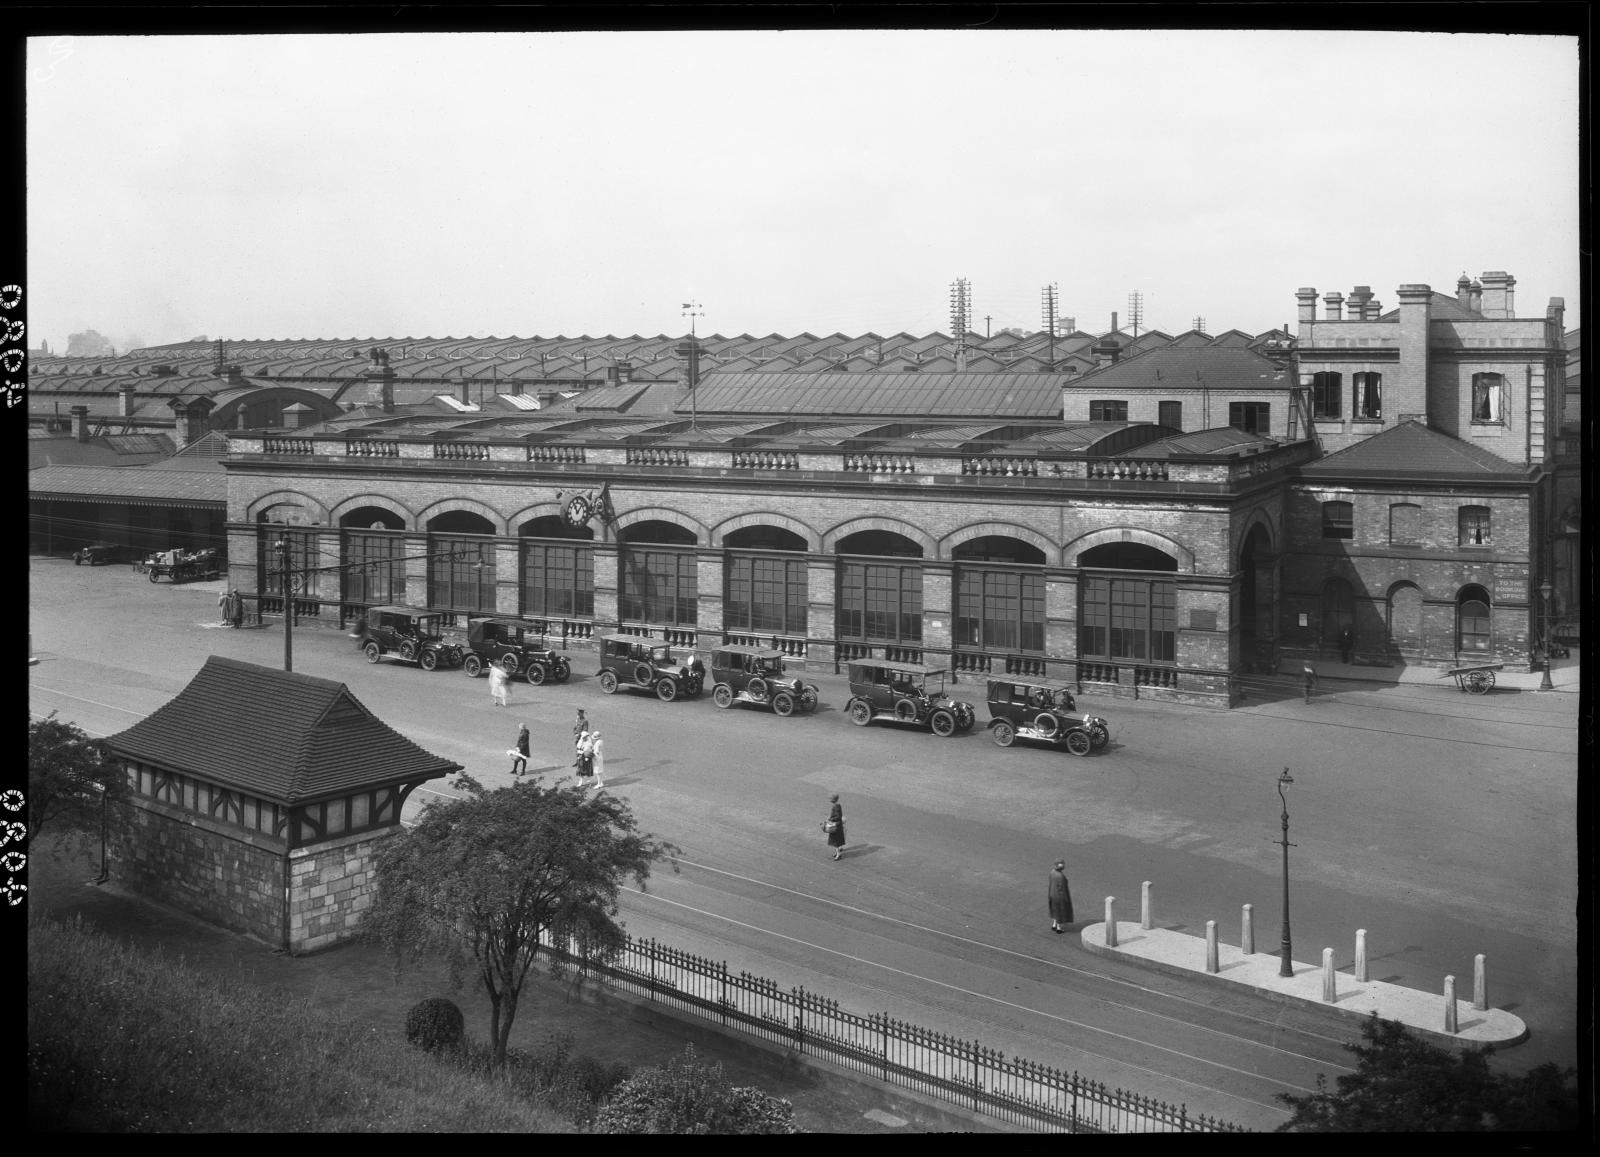 A view showing York Railway Station from an elevated position to the south-east, with a line of cars, probably taxis, parked along the road in front